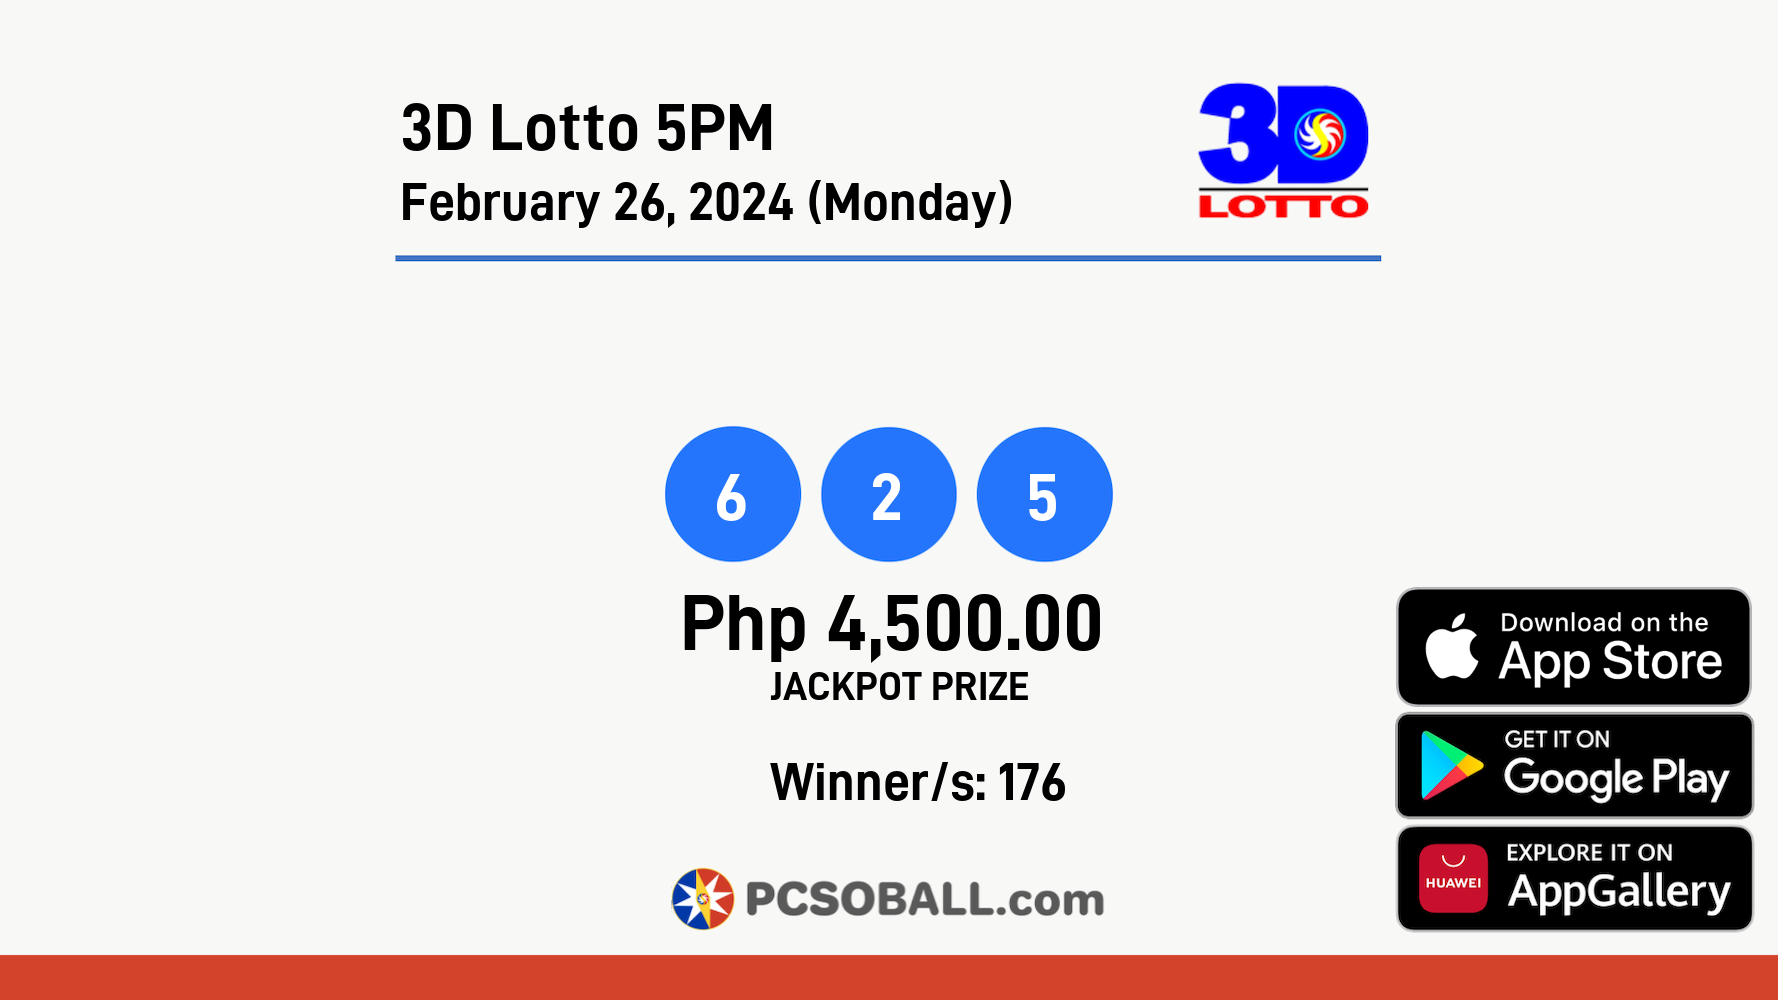 3D Lotto 5PM February 26, 2024 (Monday) Result